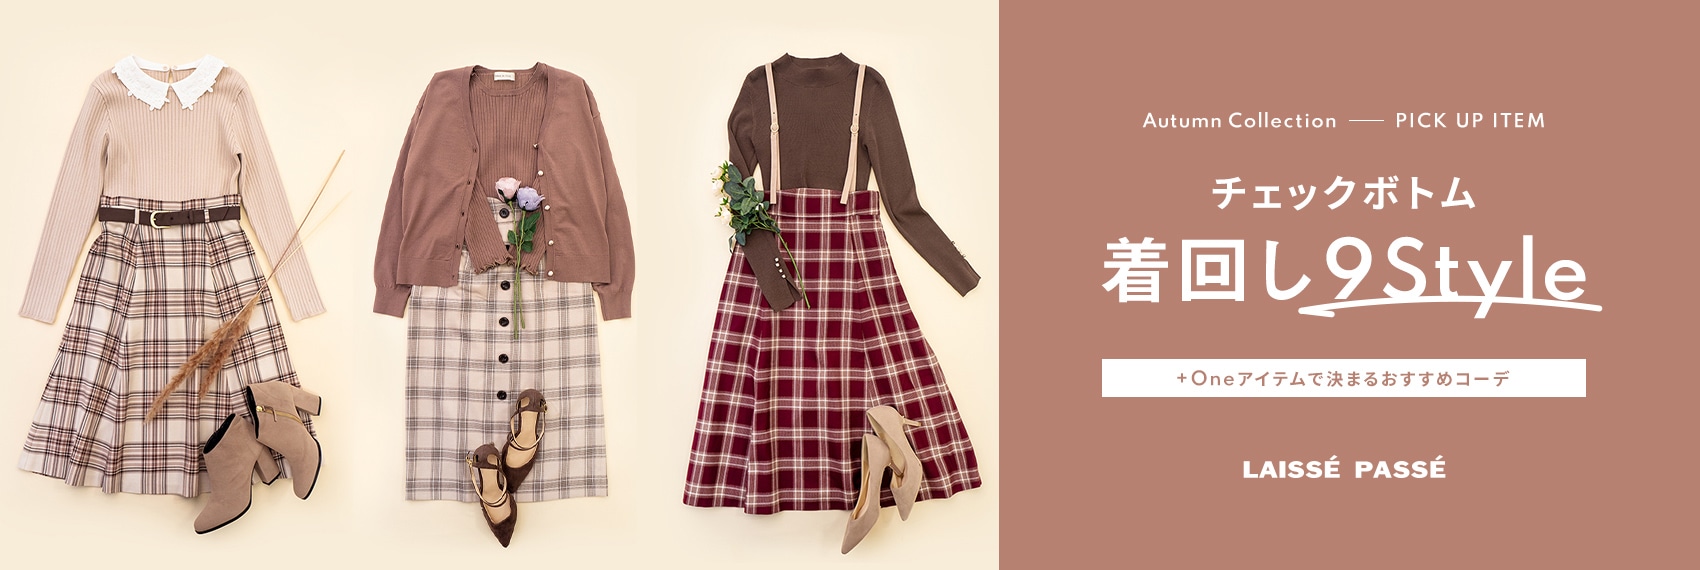 Autumn Collection チェックボトム着回し9Style